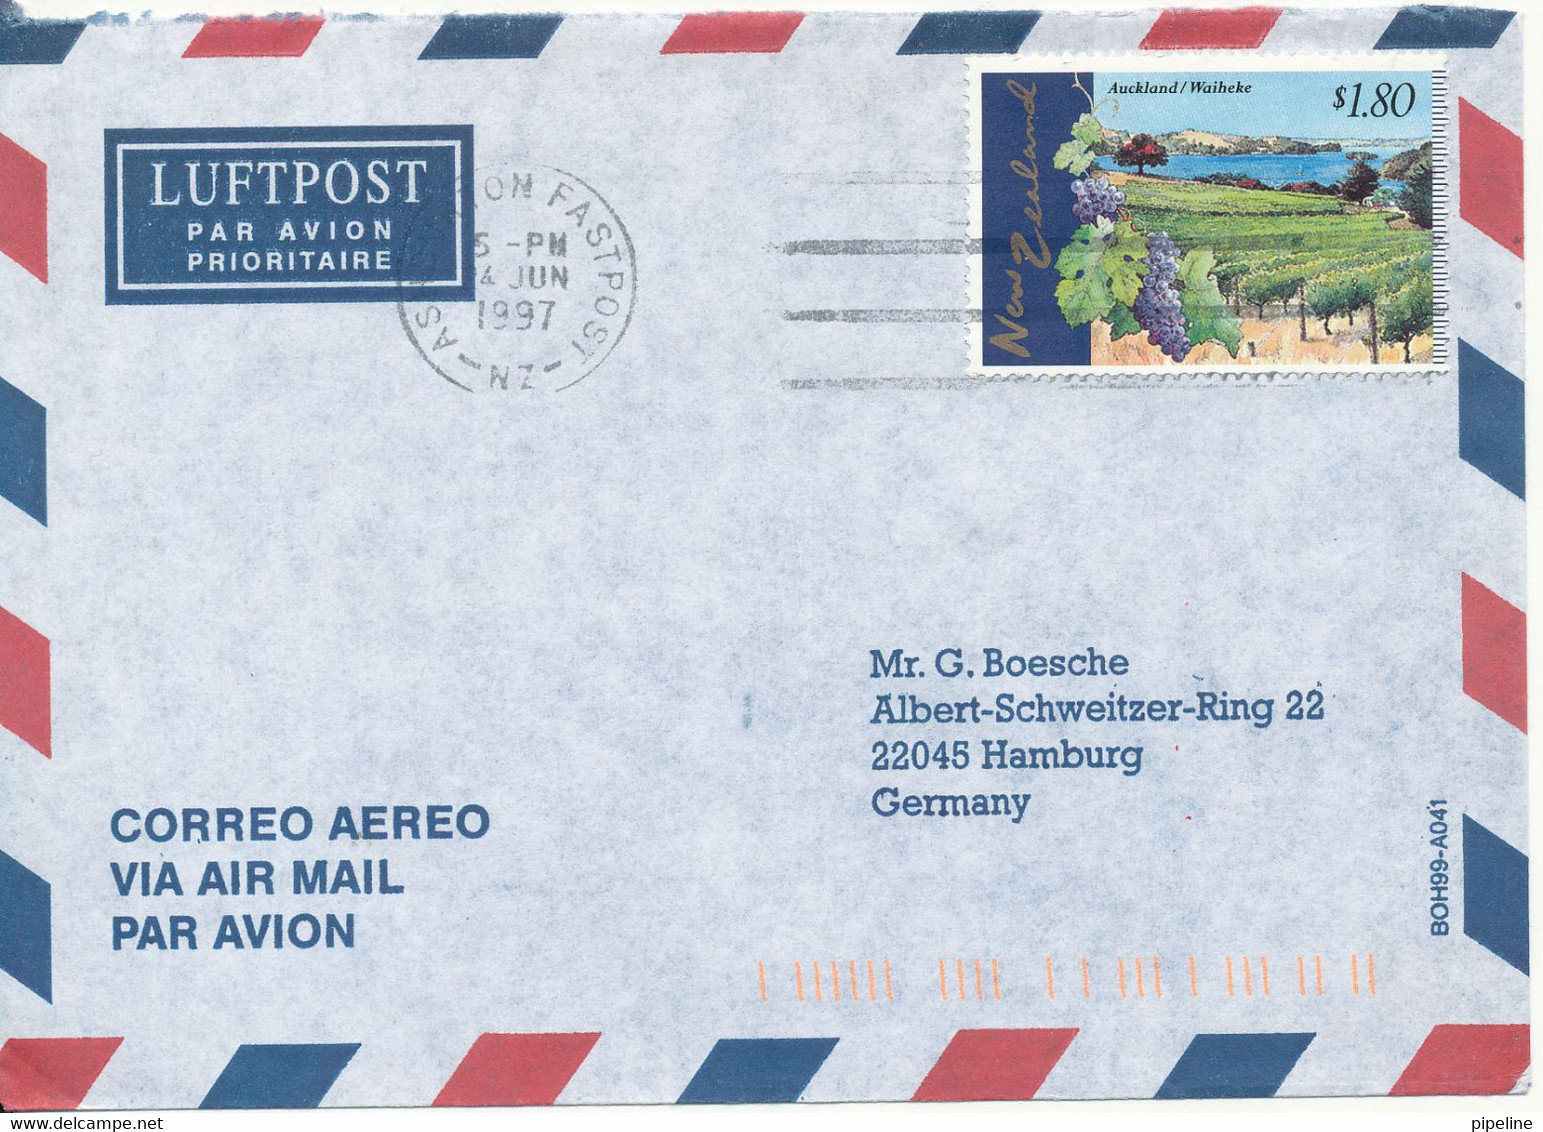 New Zealand Air Mail Cover Sent To Germany 24-6-1997 Single Franked - Luchtpost